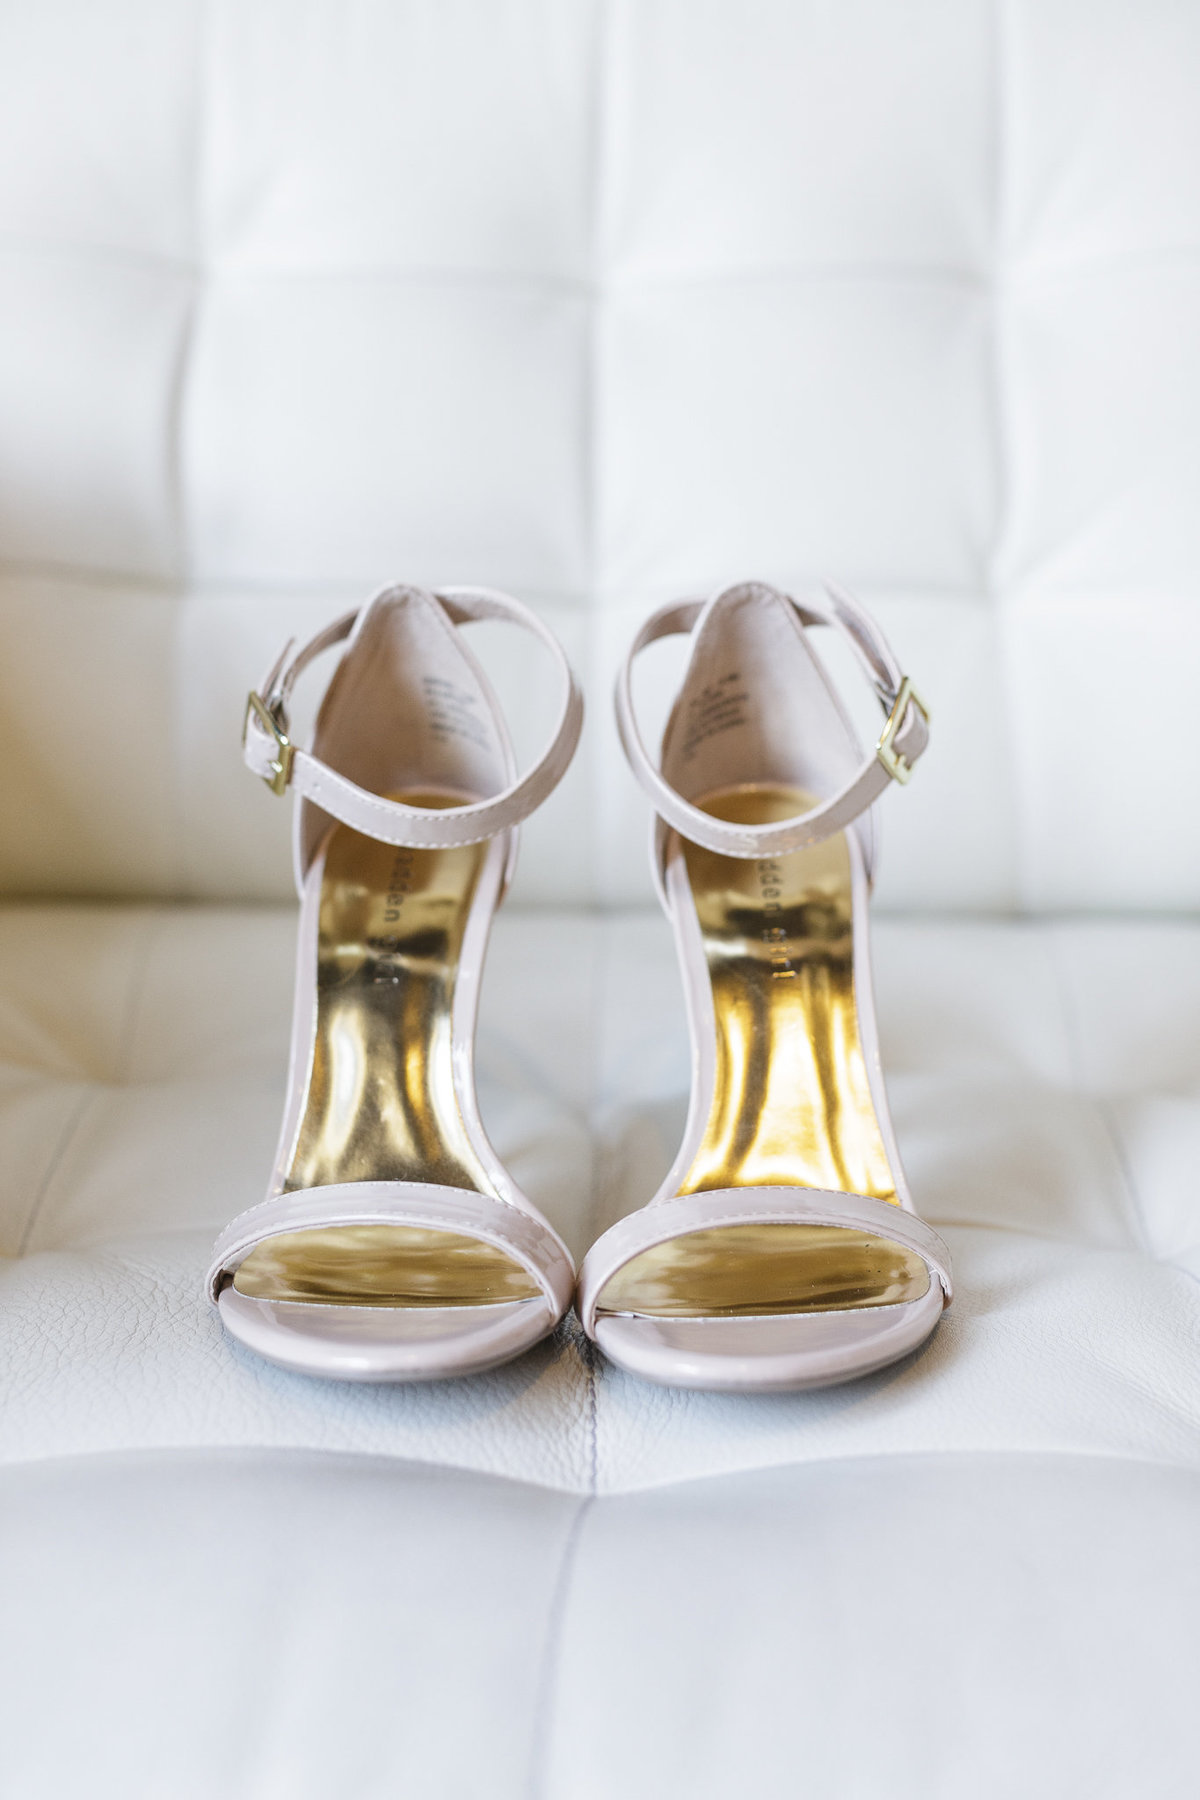 Wedding Shoes worn at the crane bay event center